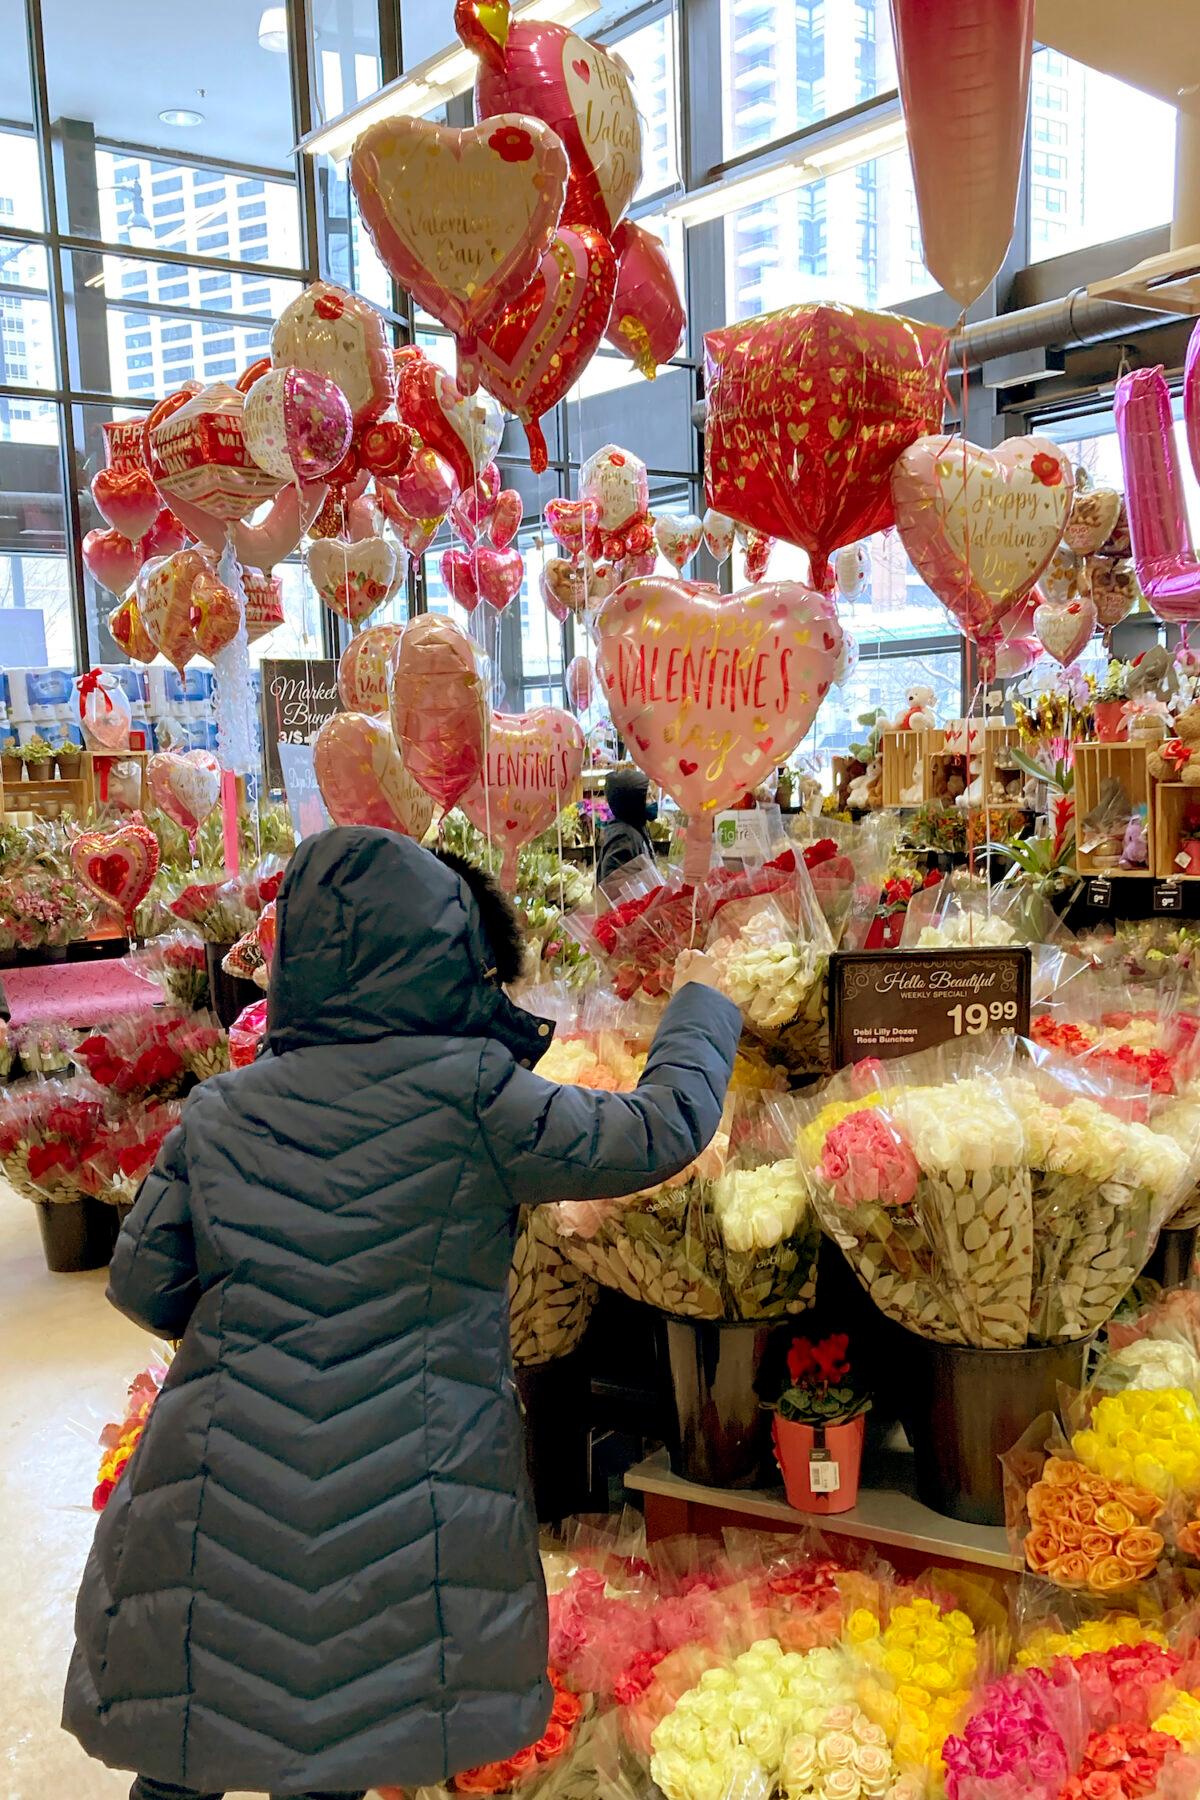 A shopper looks over Valentine's Day gifts at a Chicago area grocery store on Feb. 13, 2021. (Charles Rex Arbogast/AP)